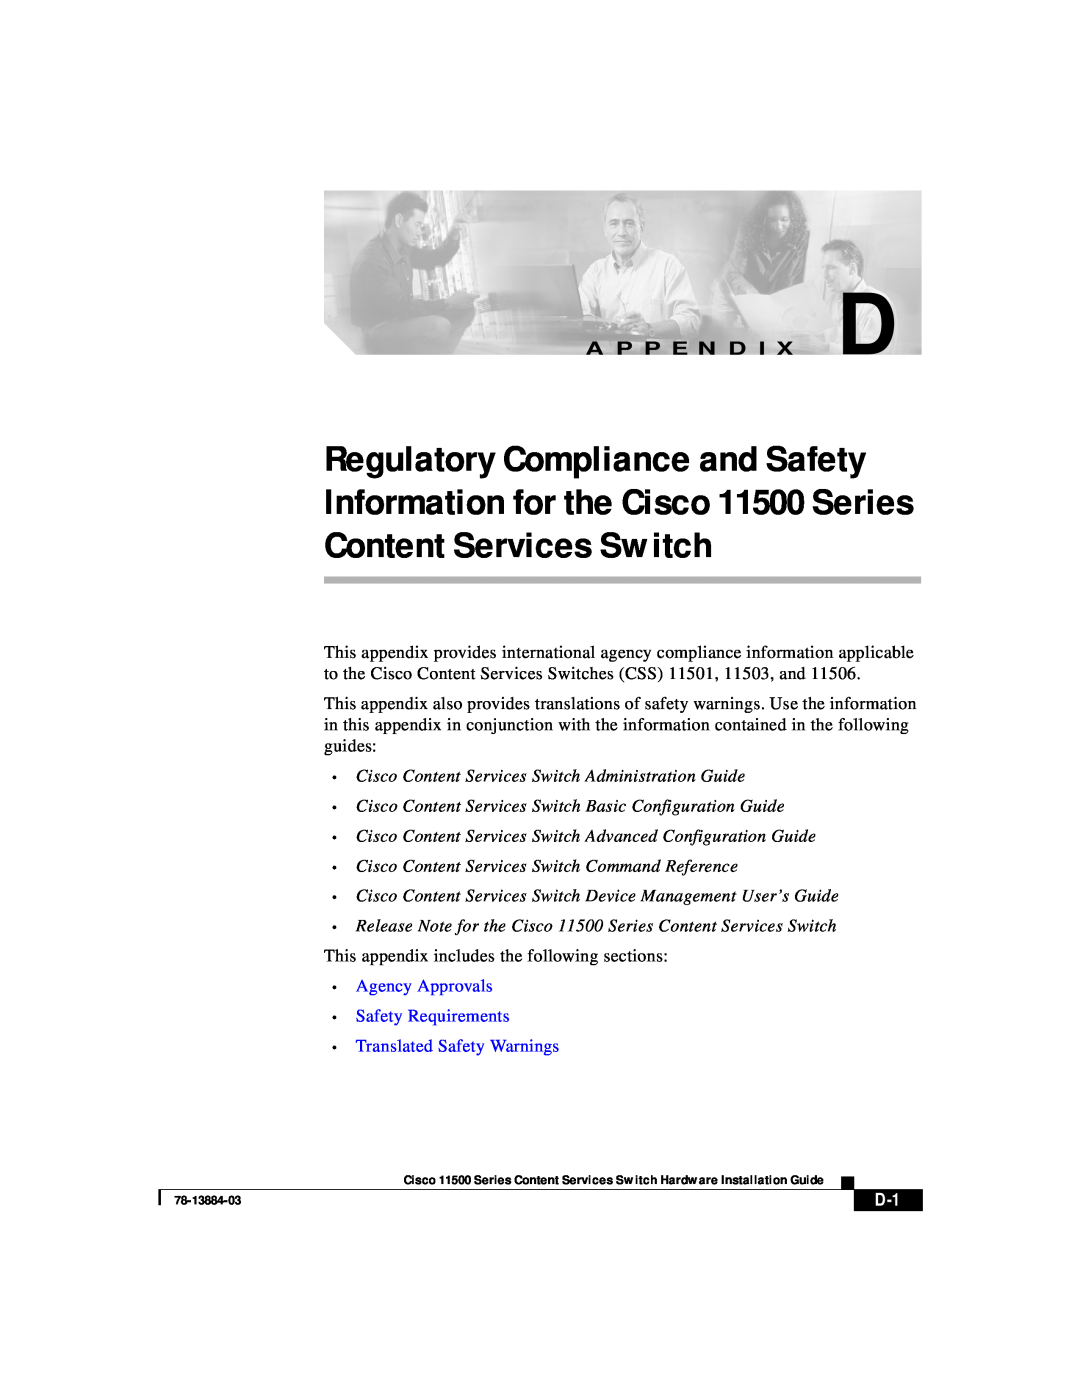 Cisco Systems 11500 Series manual A P P E N D I X D, Agency Approvals Safety Requirements Translated Safety Warnings 